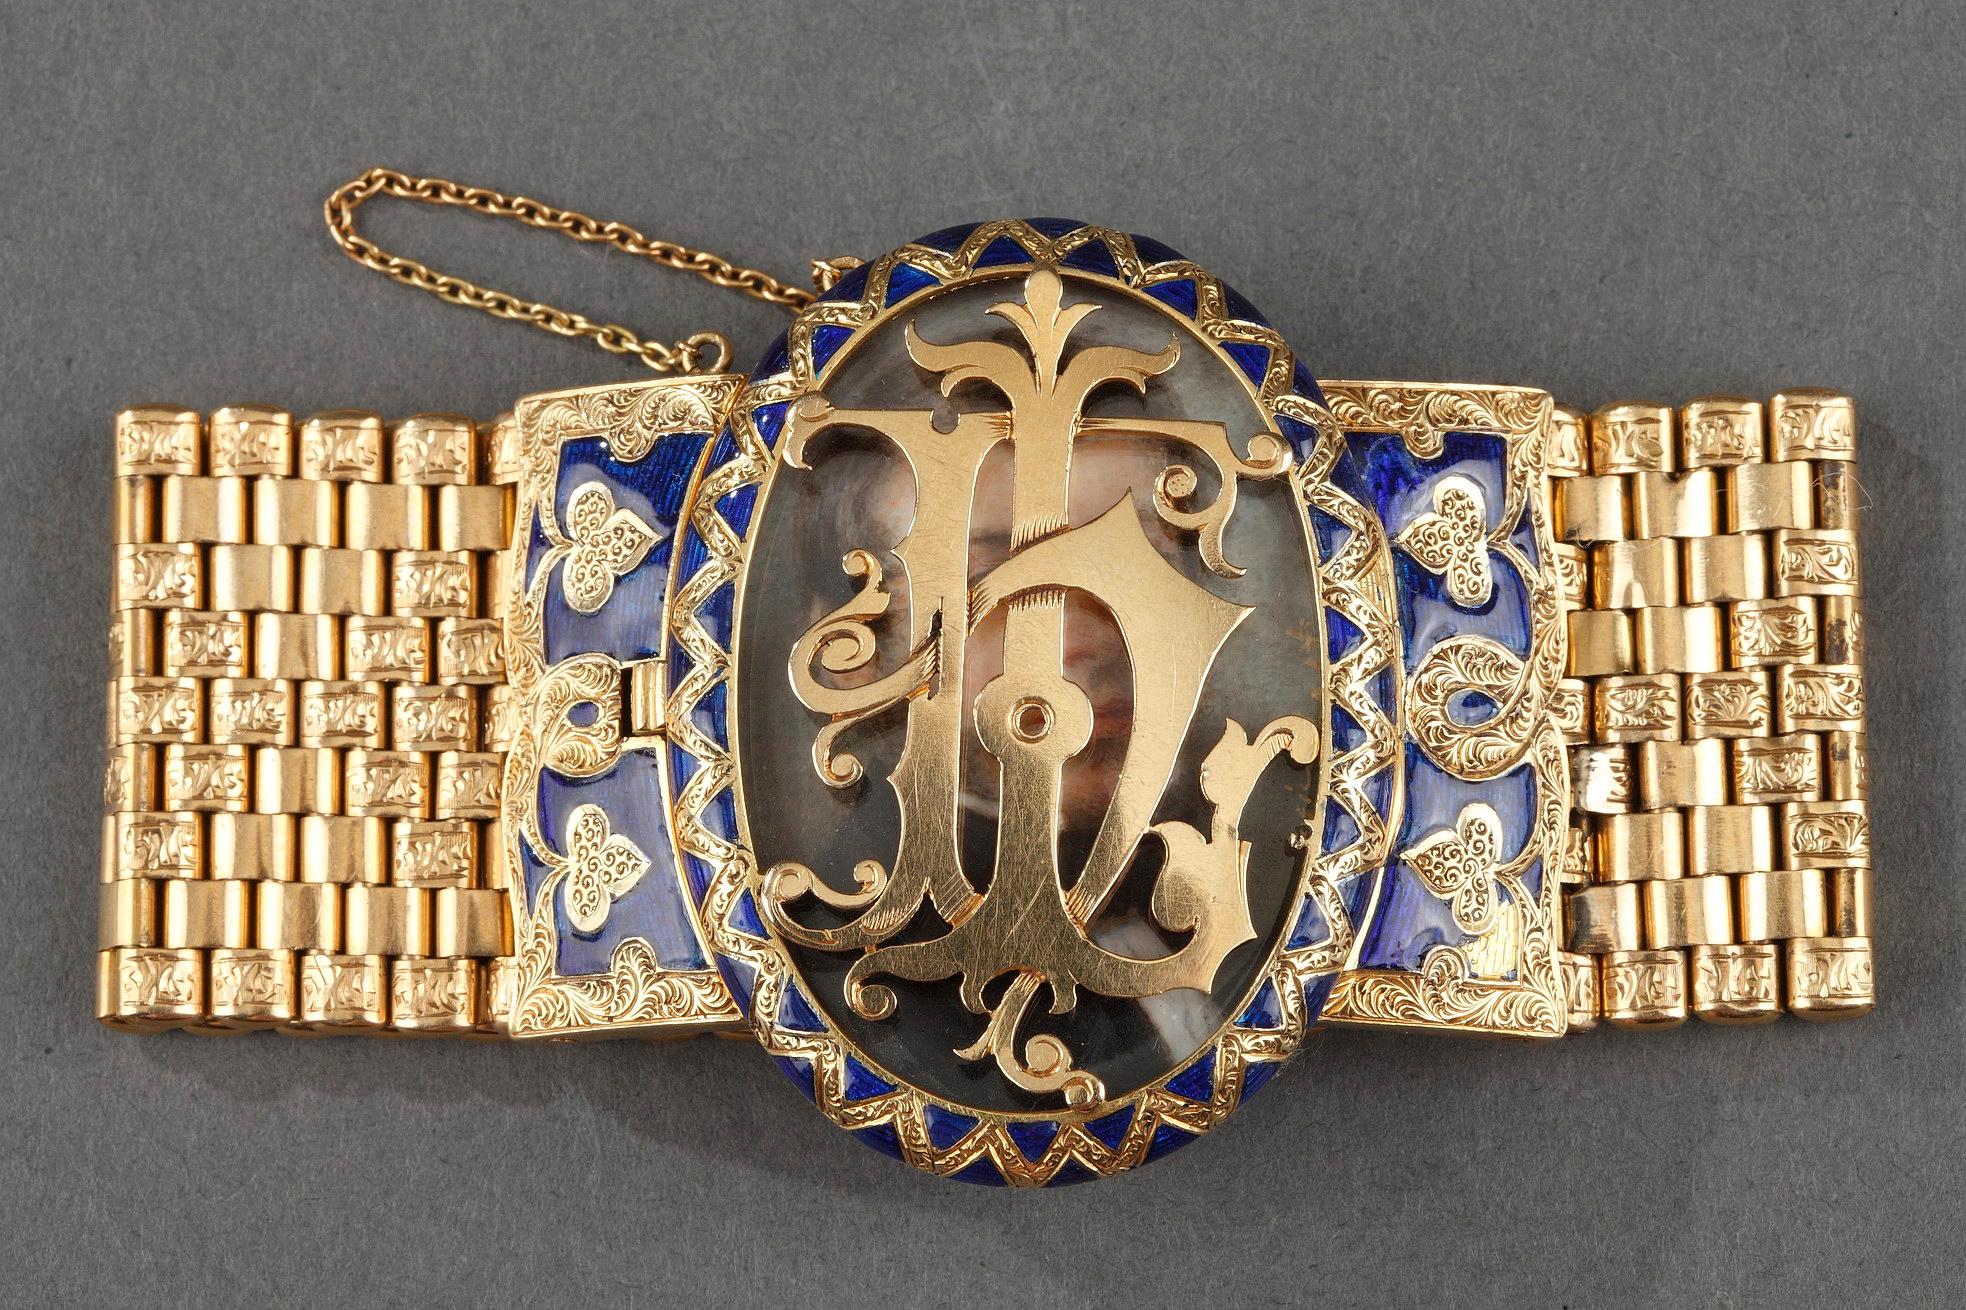 The strap of woven gold with stylized patterns arranged alternately and decorated at the ends with oval medallion surrounding with blue enameled gold and a hinged openwork cover to protect a miniature. The cover features a monogram. The miniature